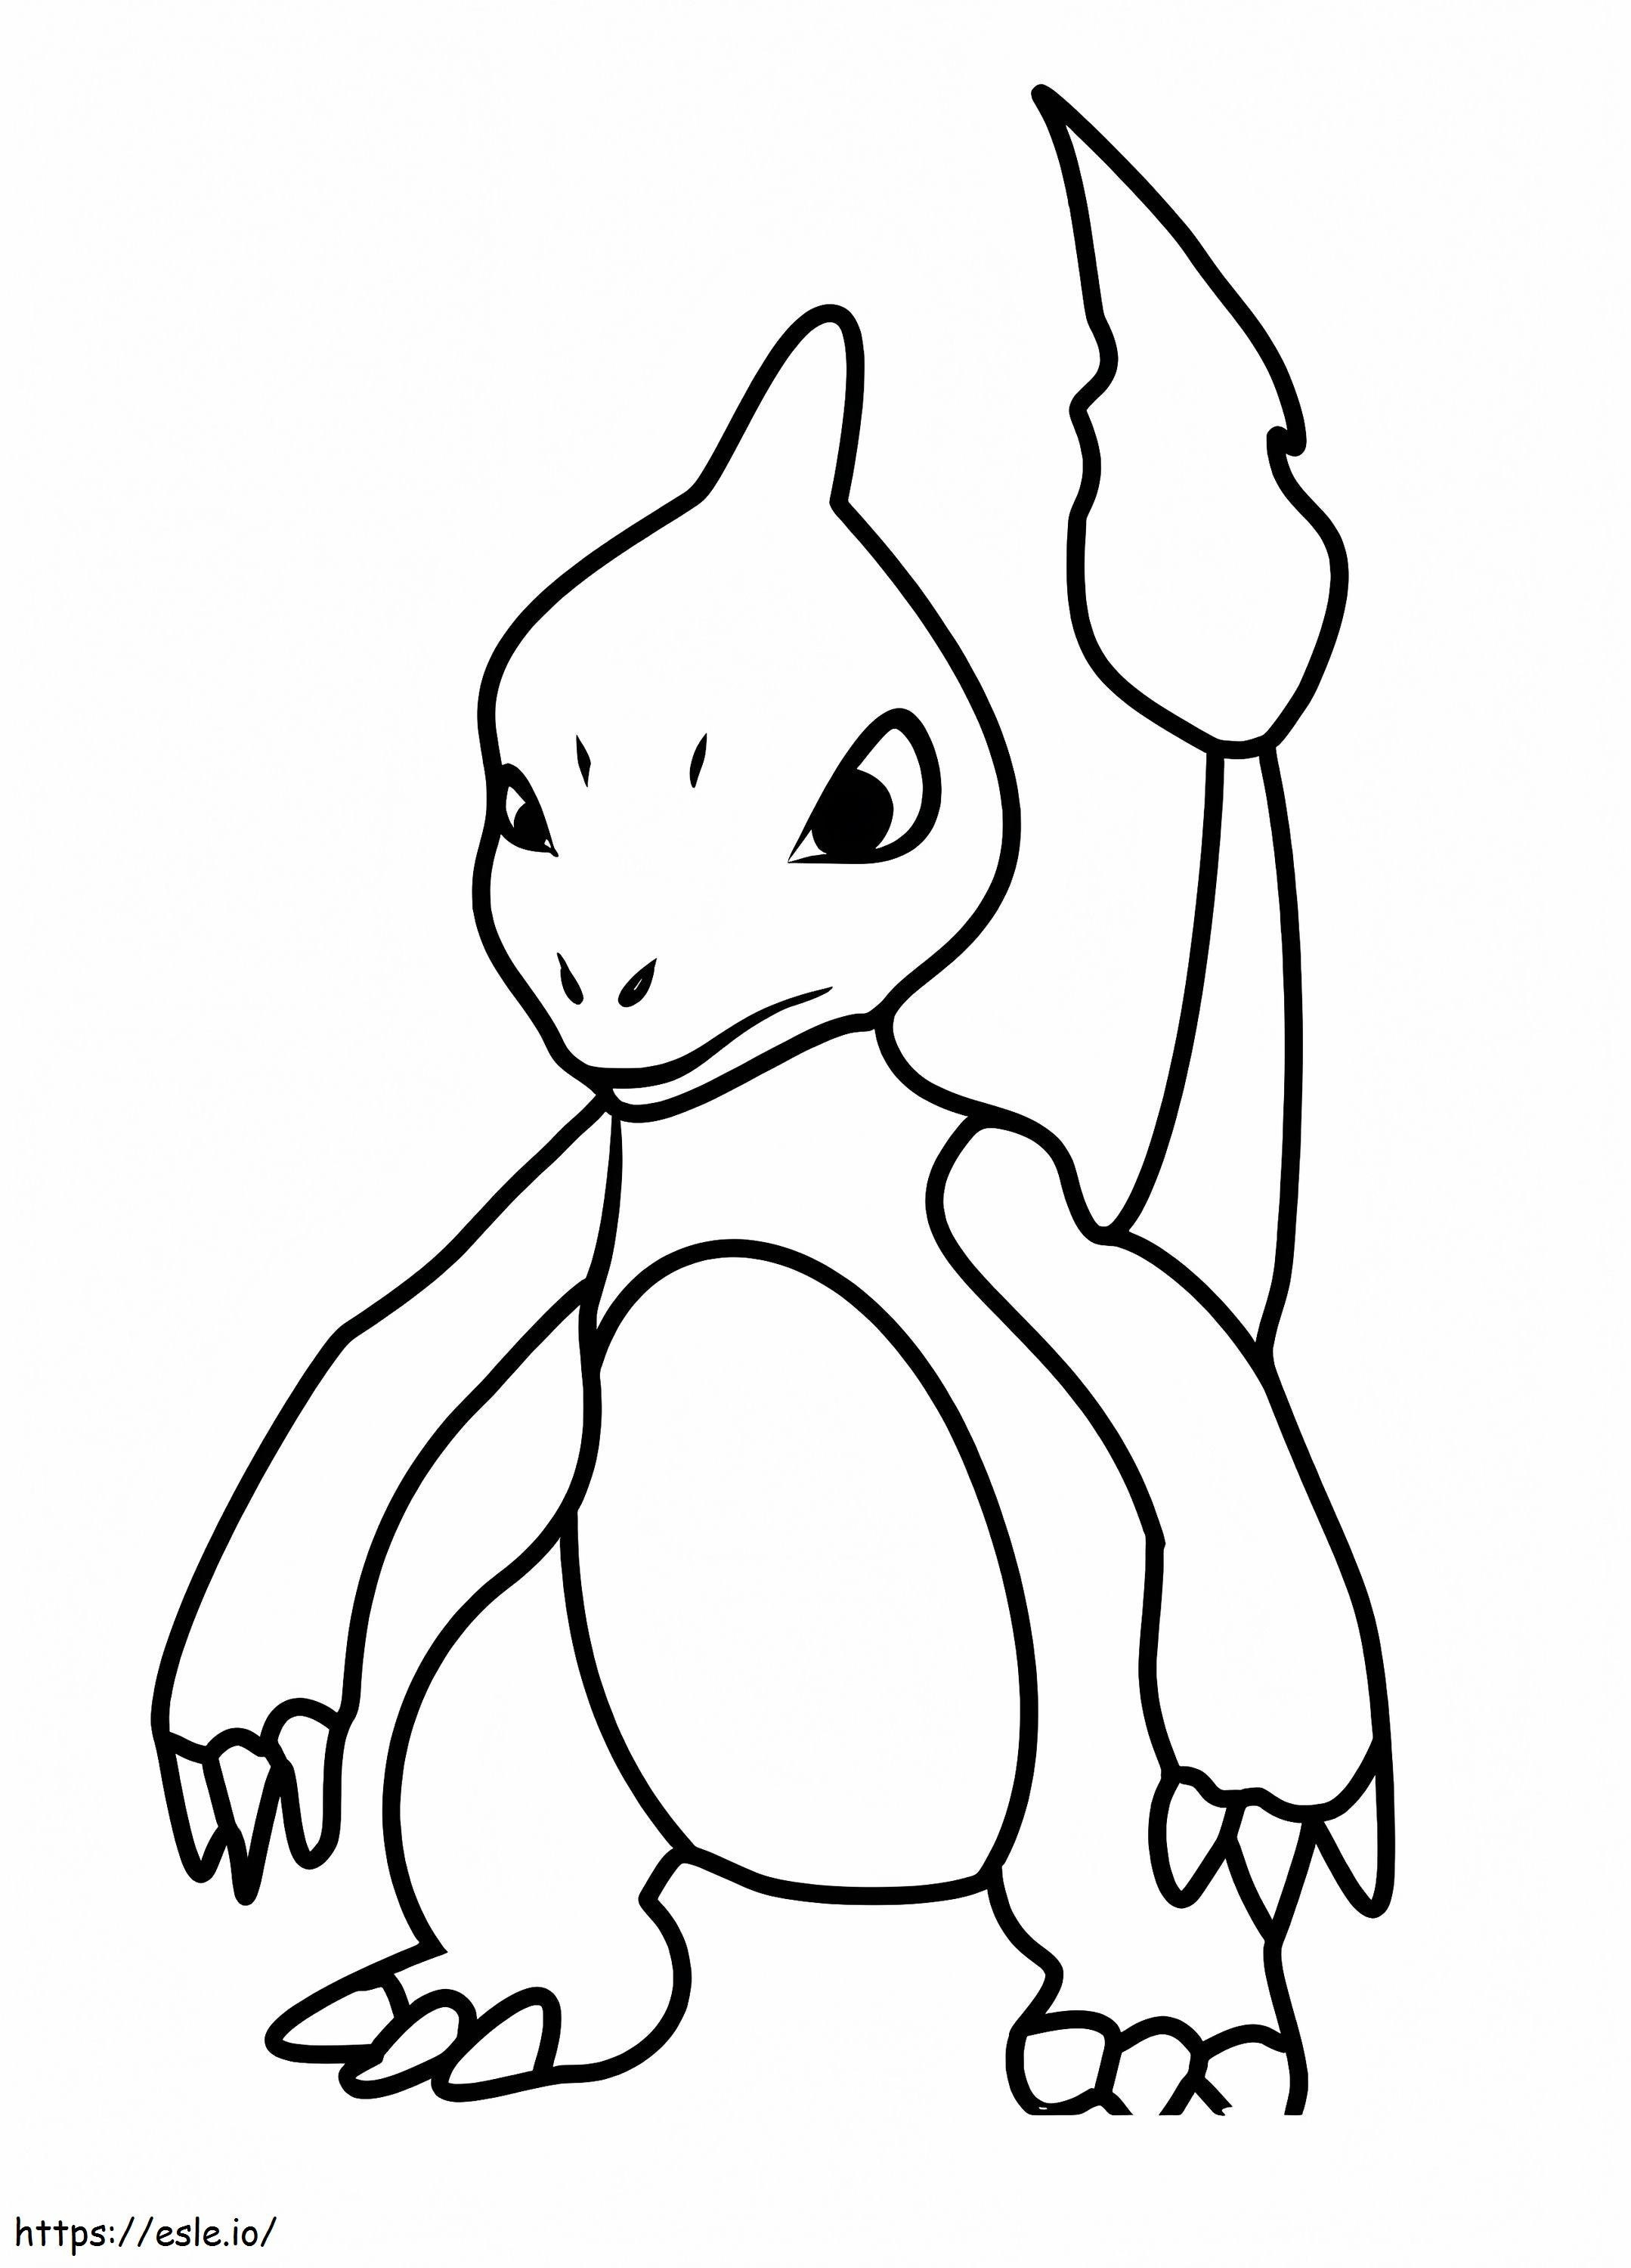 Charmeleon 2 coloring page